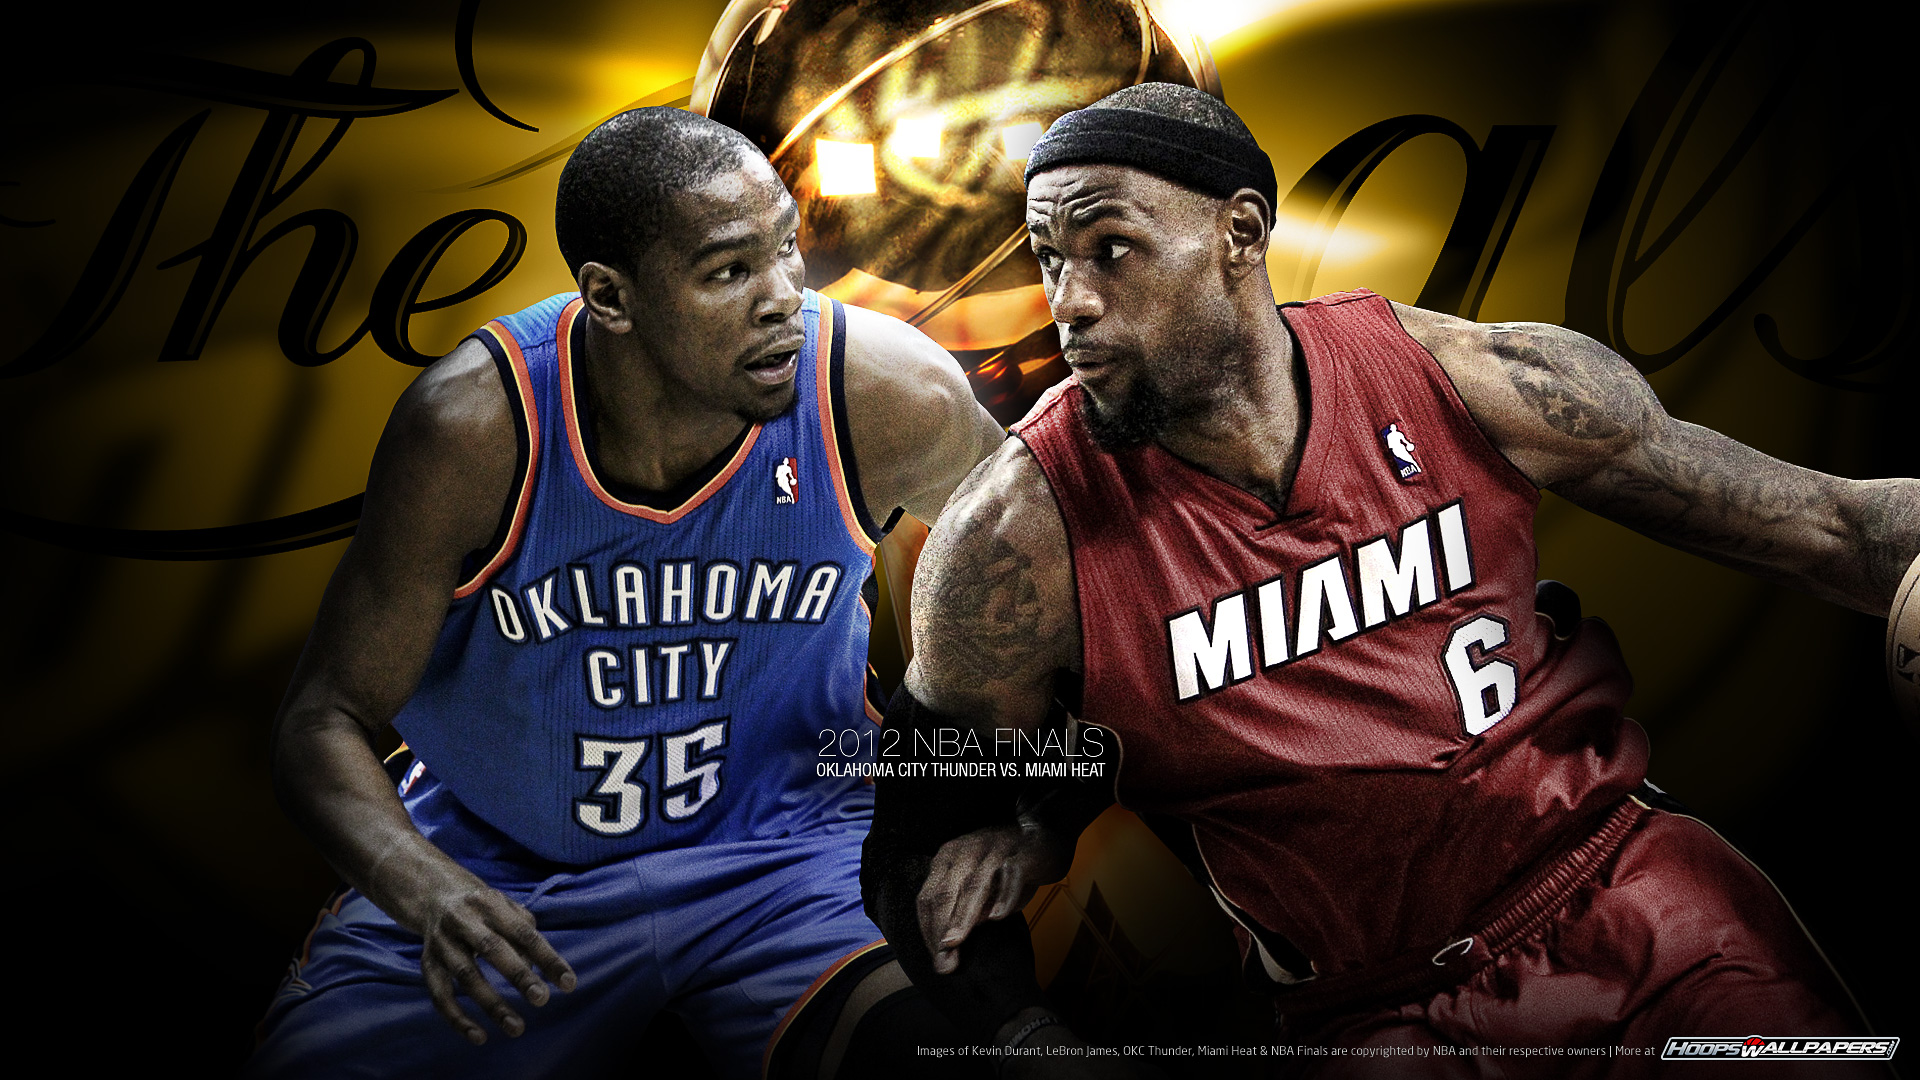 HoopsWallpapers.com – Get the latest HD and mobile NBA wallpapers today! » Miami Heat